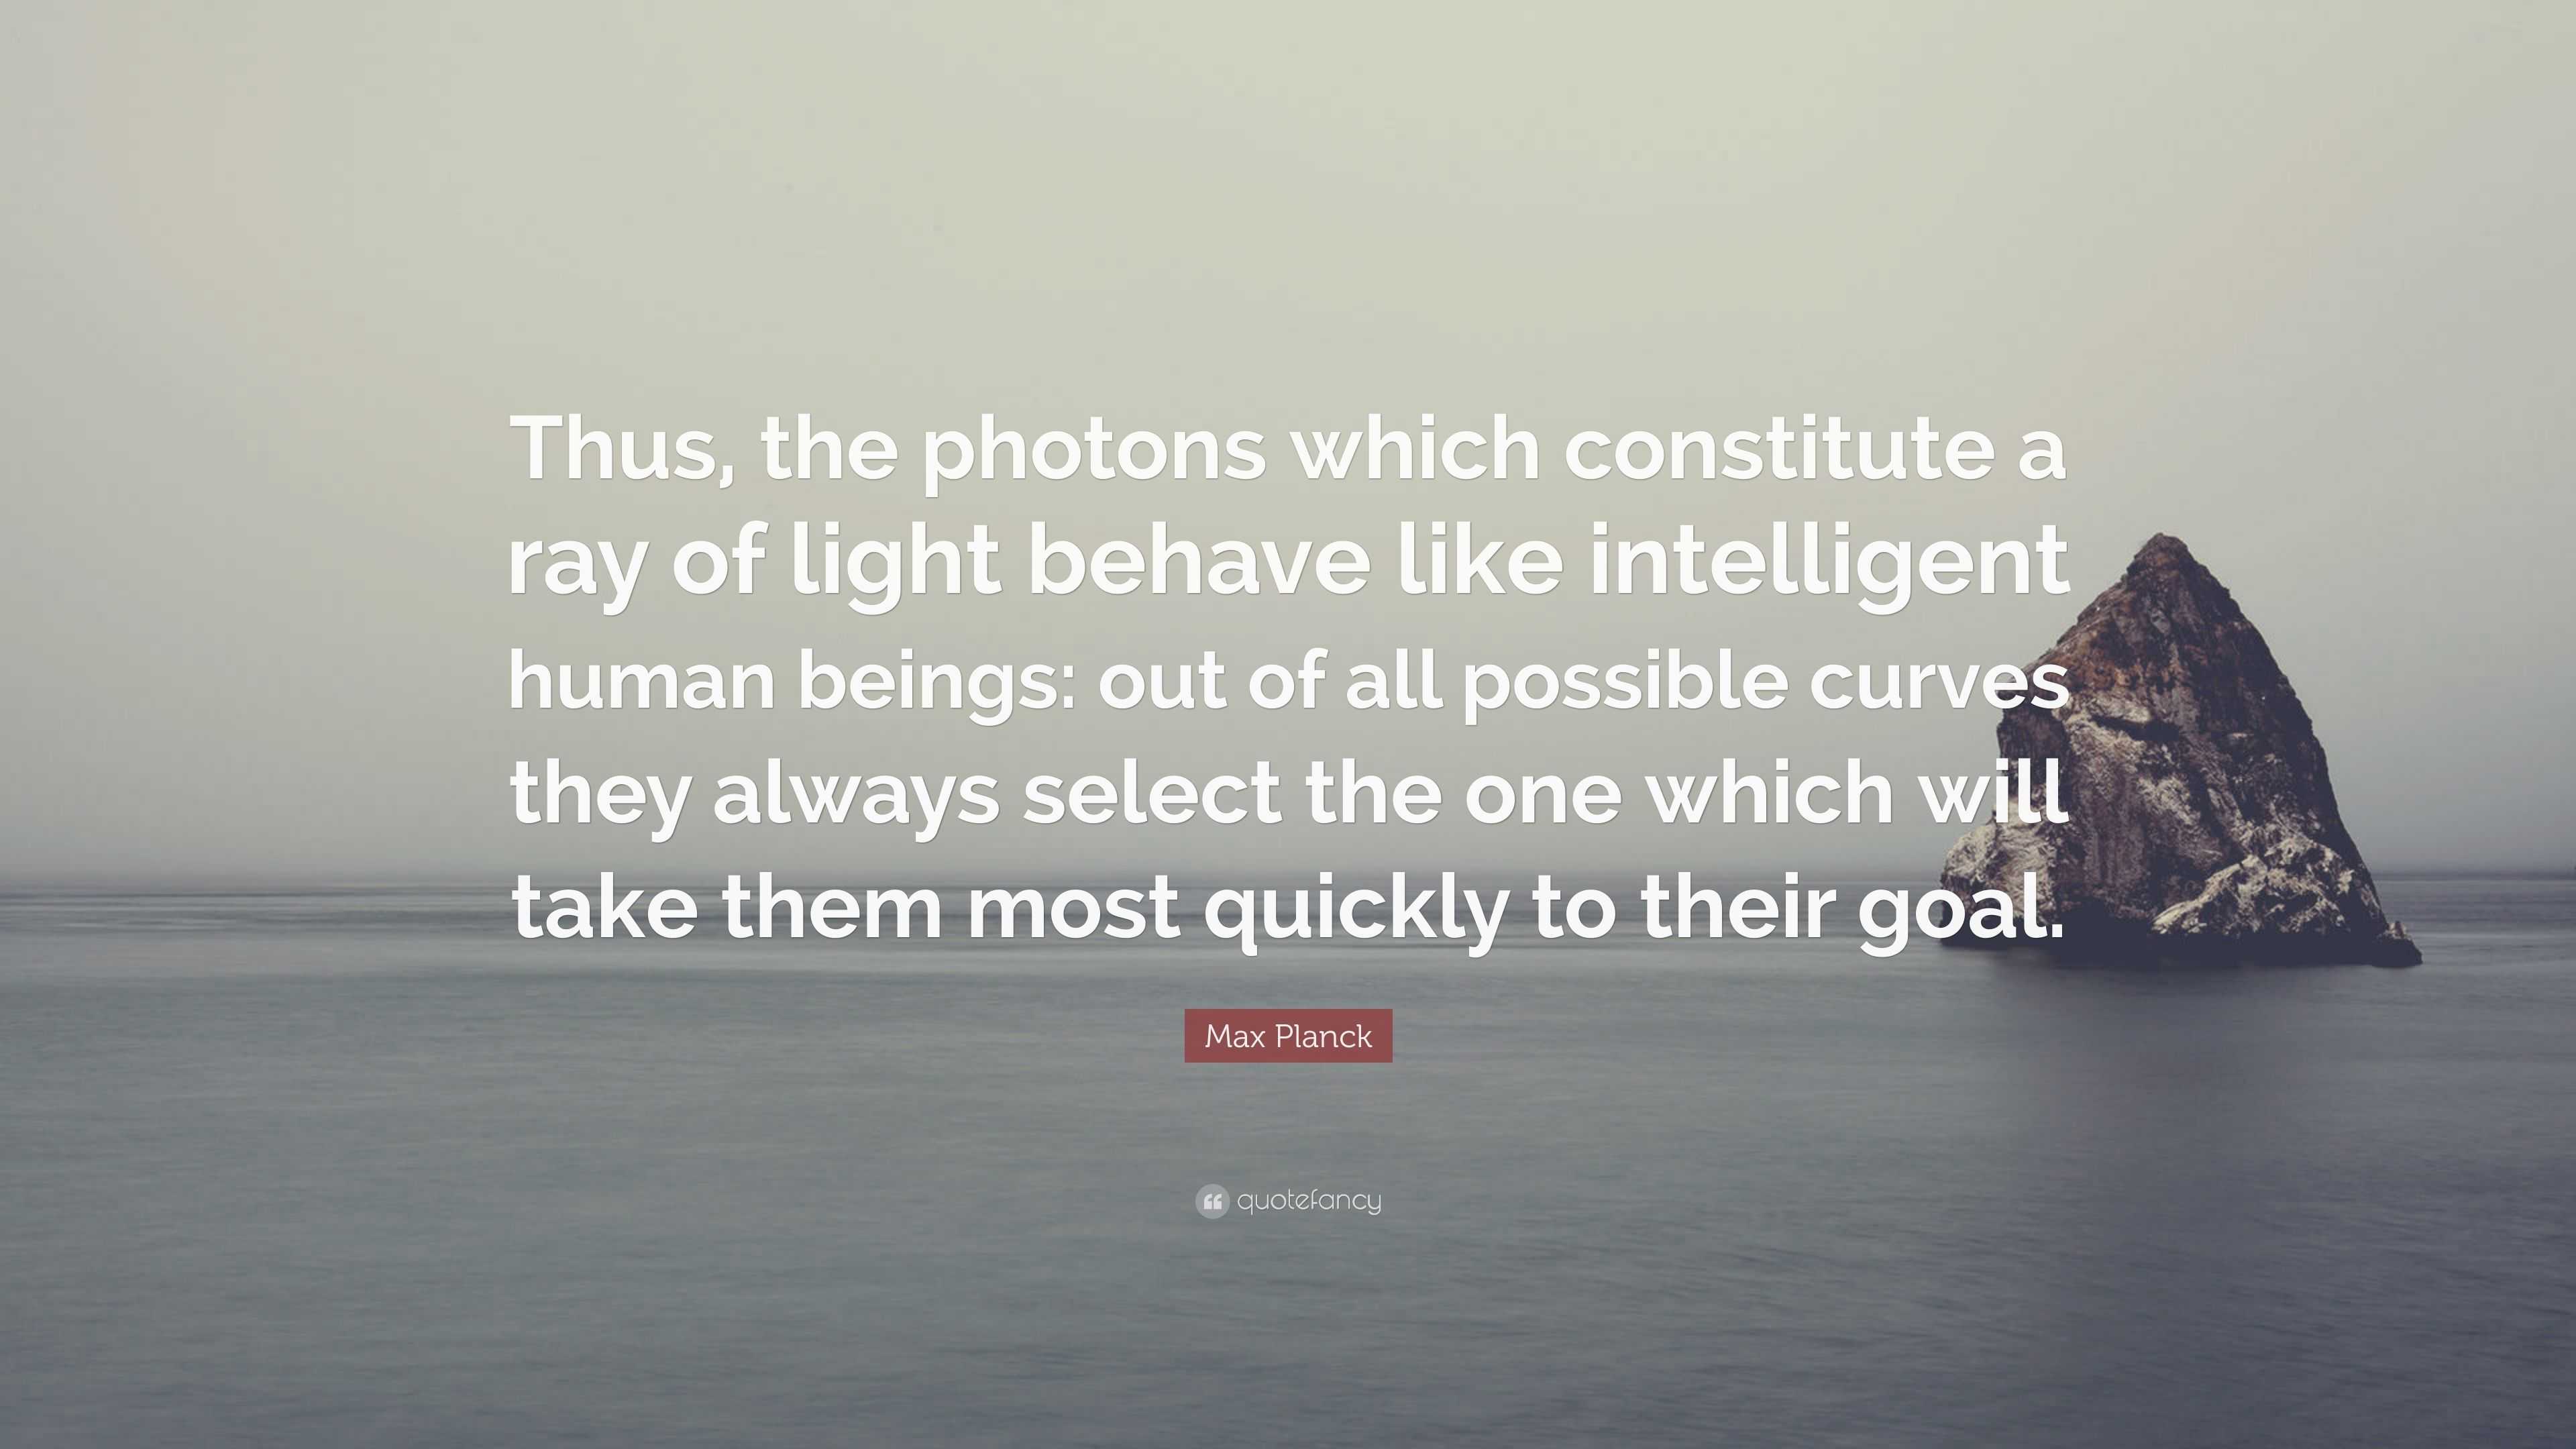 Max Planck Quote: “Thus, the photons which constitute a ray of light ...